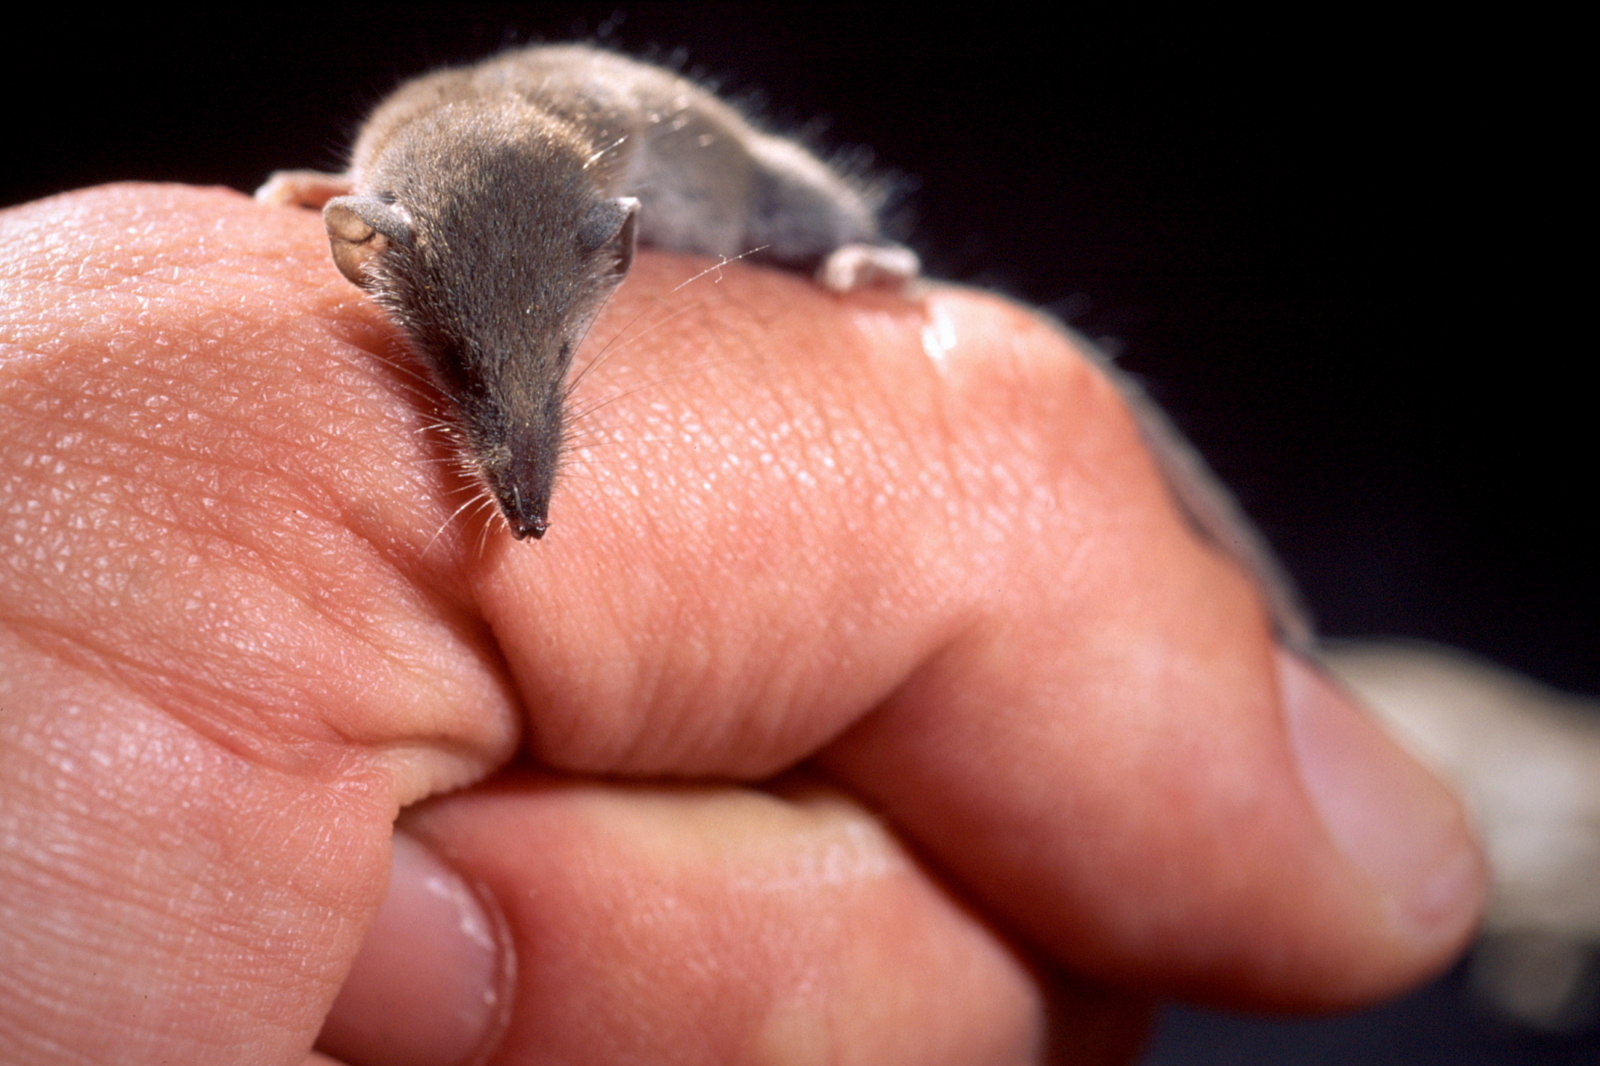 Which is the smallest mammal in the world?